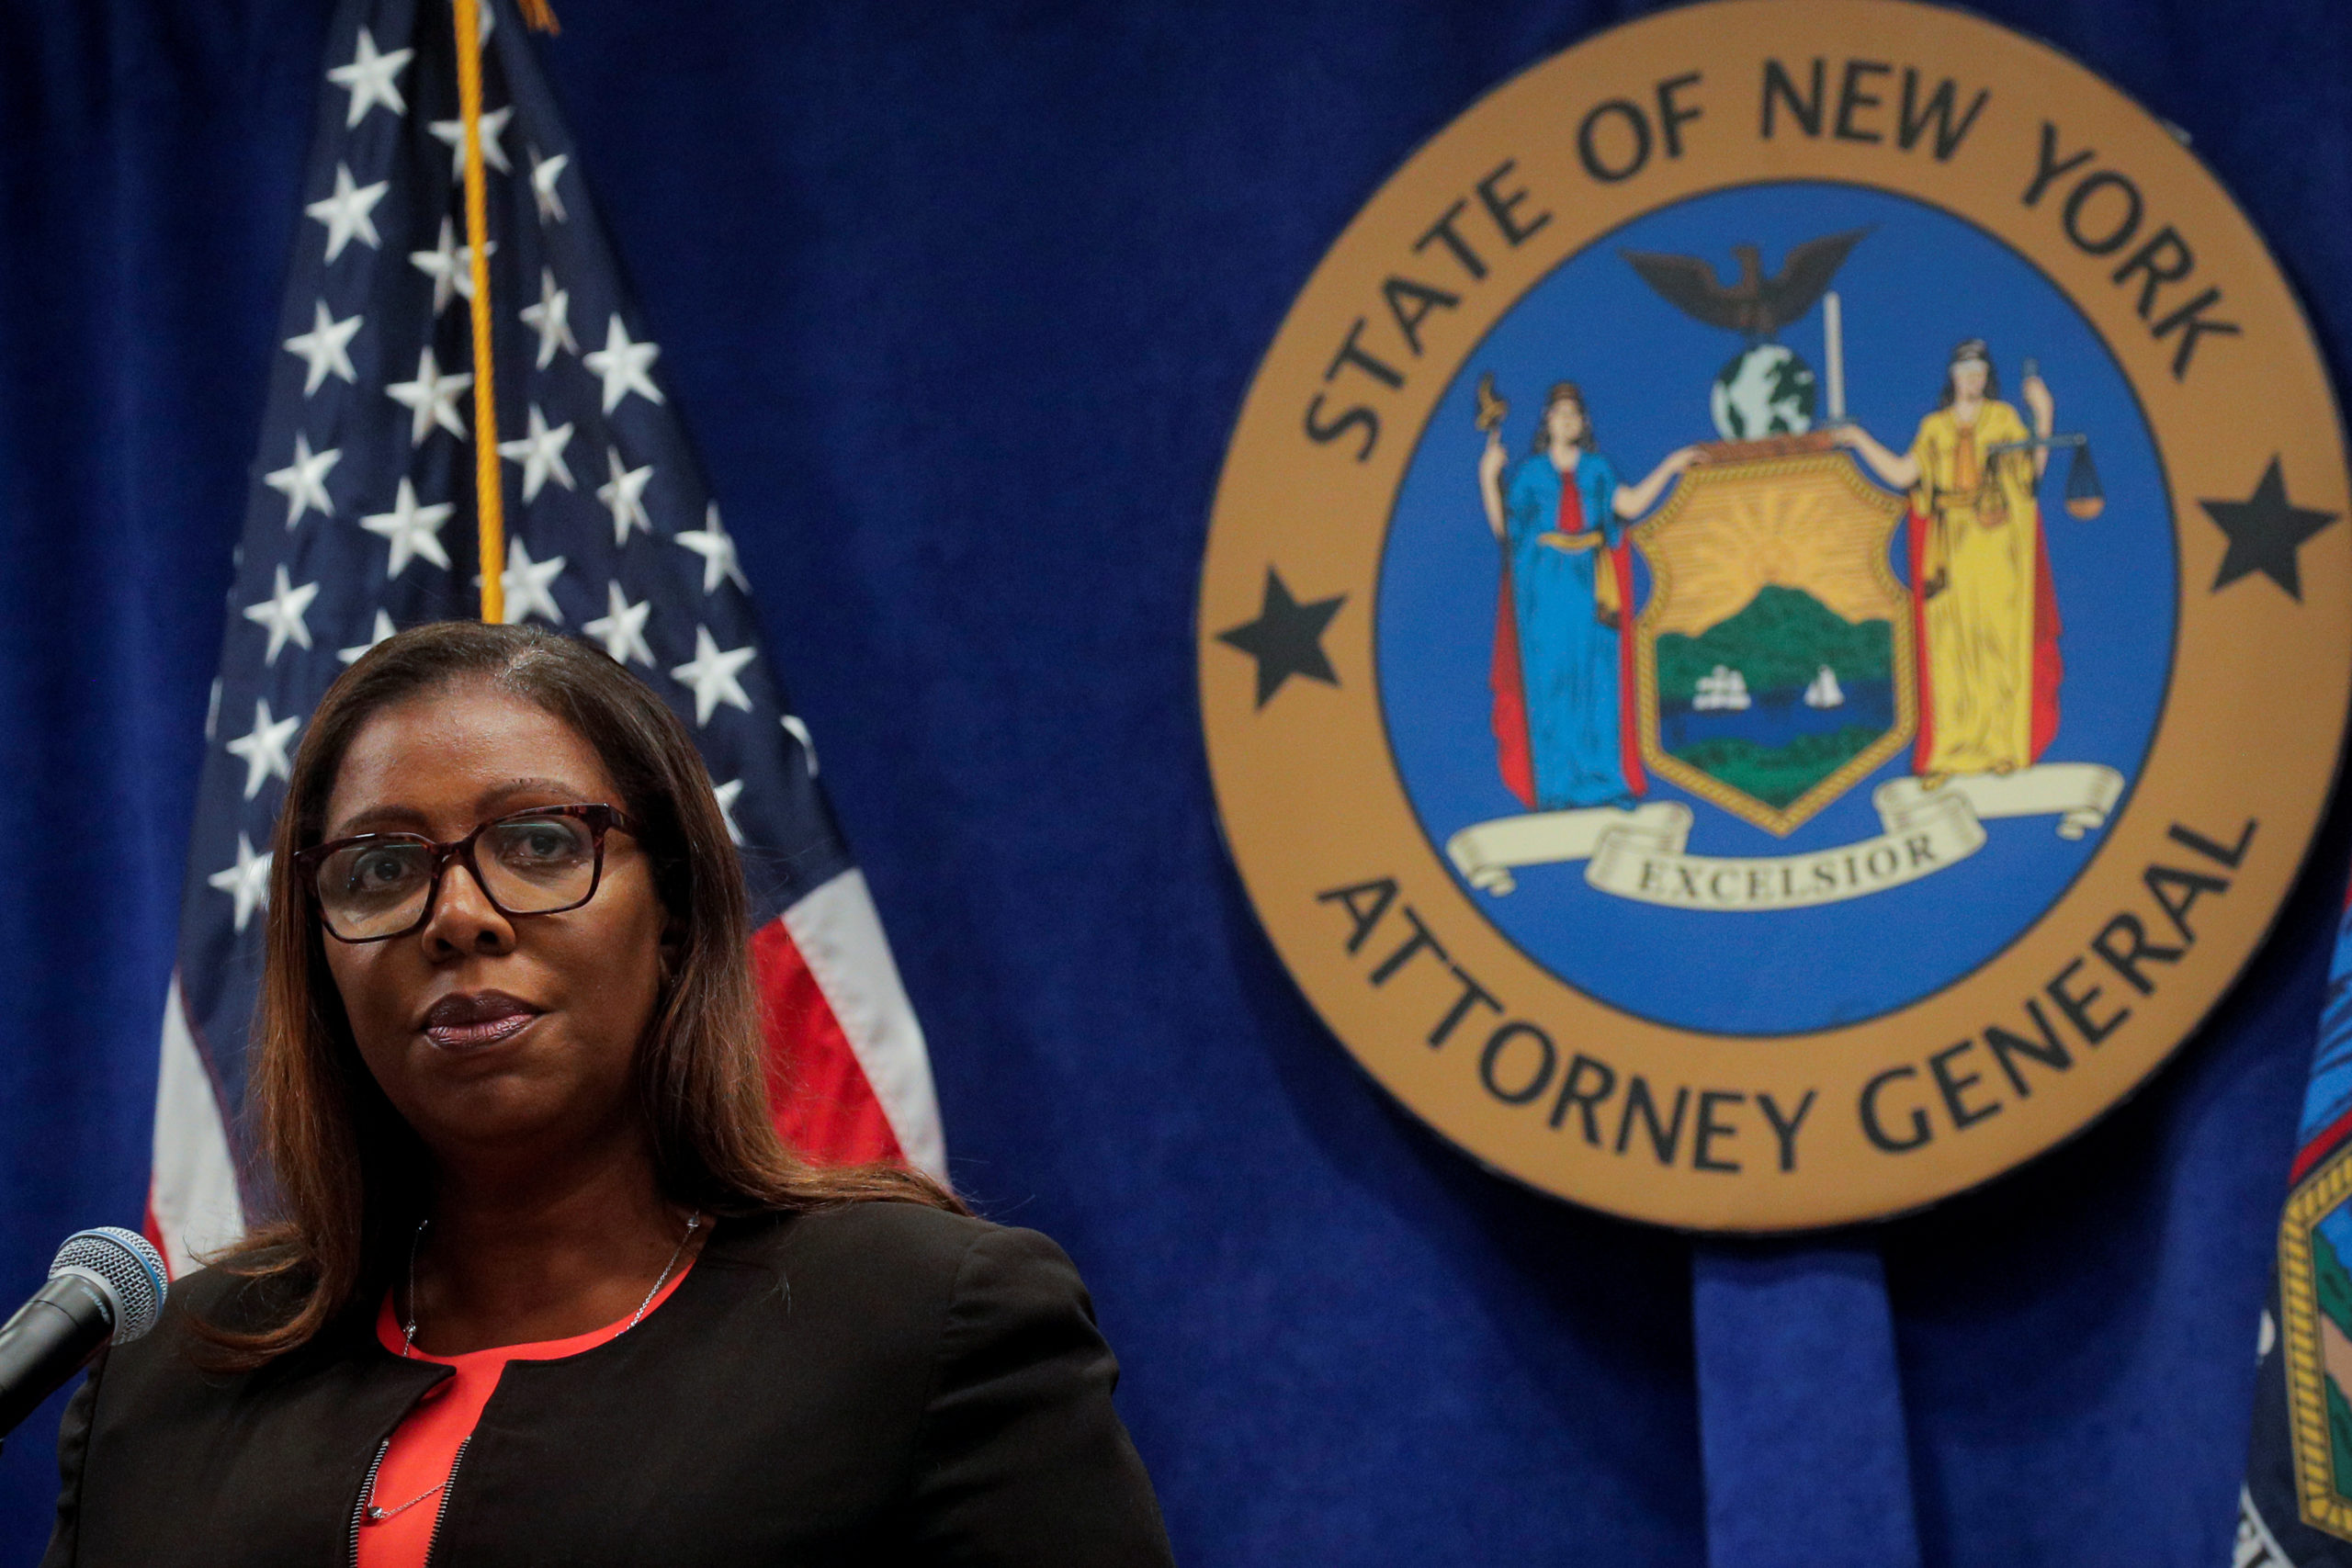 New York State Attorney General, Letitia James, speaks during a news conference, to announce a suit to dissolve the National Rifle Association, In New York, U.S., August 6, 2020. REUTERS/Brendan McDermid